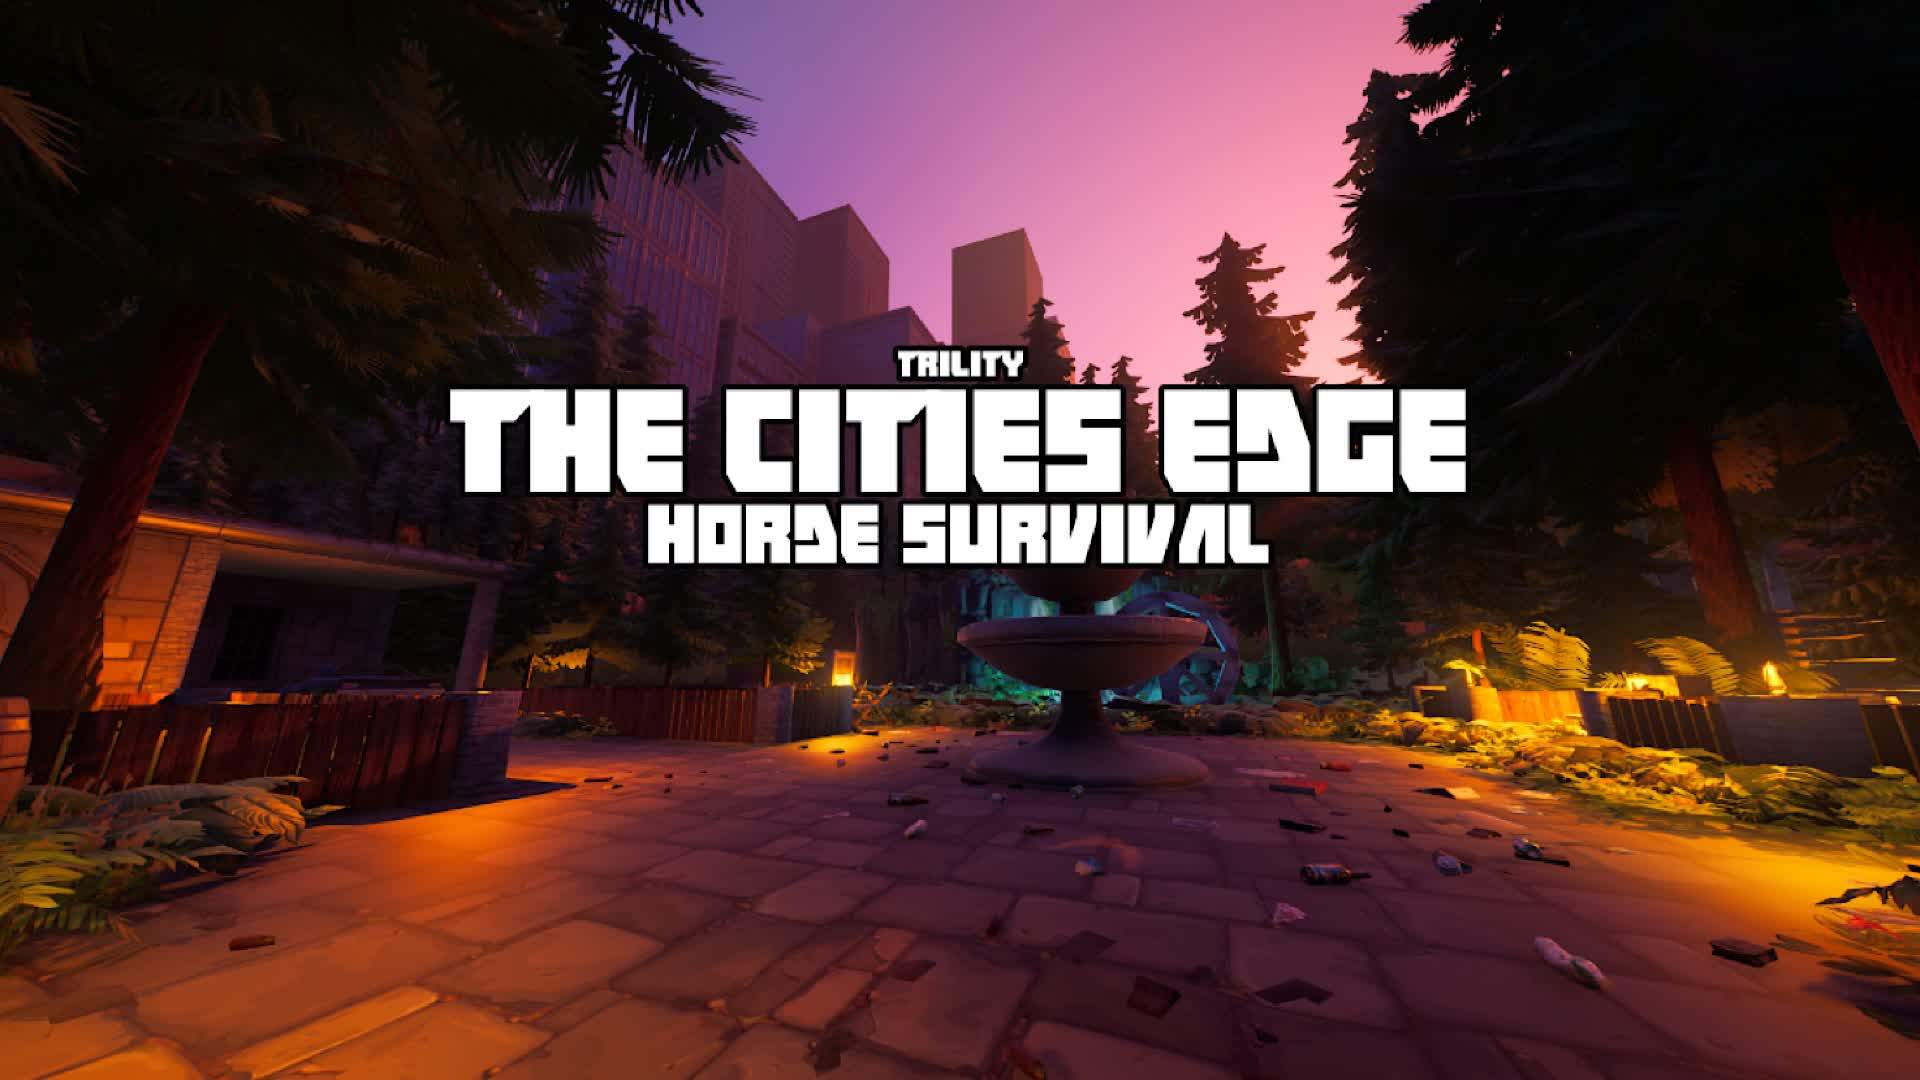 THE CITIES EDGE [HORDE SURVIVAL]